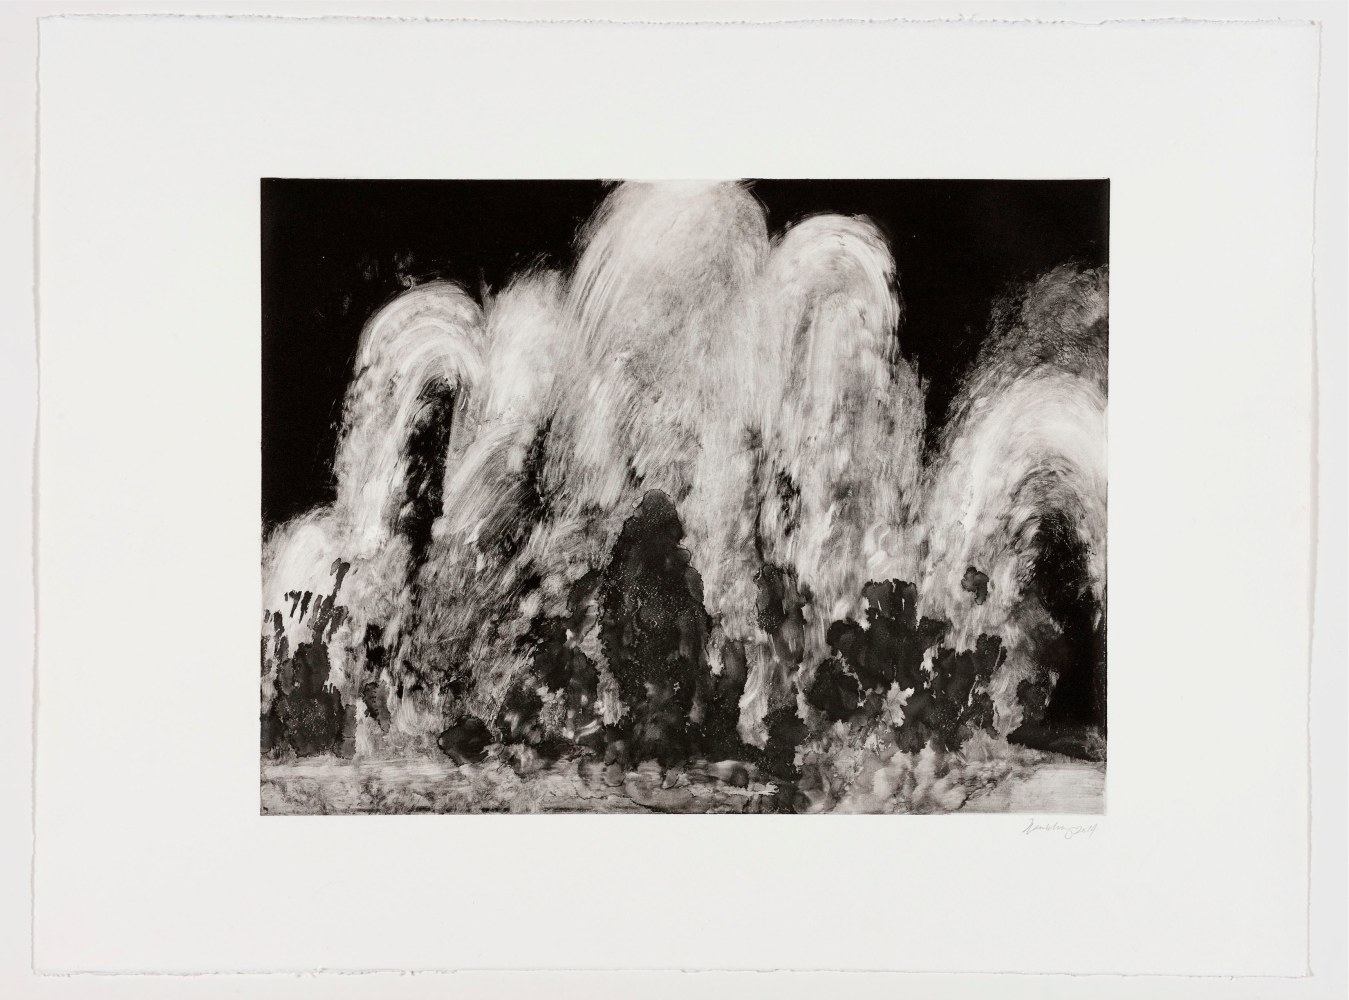 Wall of water 9, 2014

monotype

22 3/16 x 29 5/8 in. / 56.5 x 75.3 cm